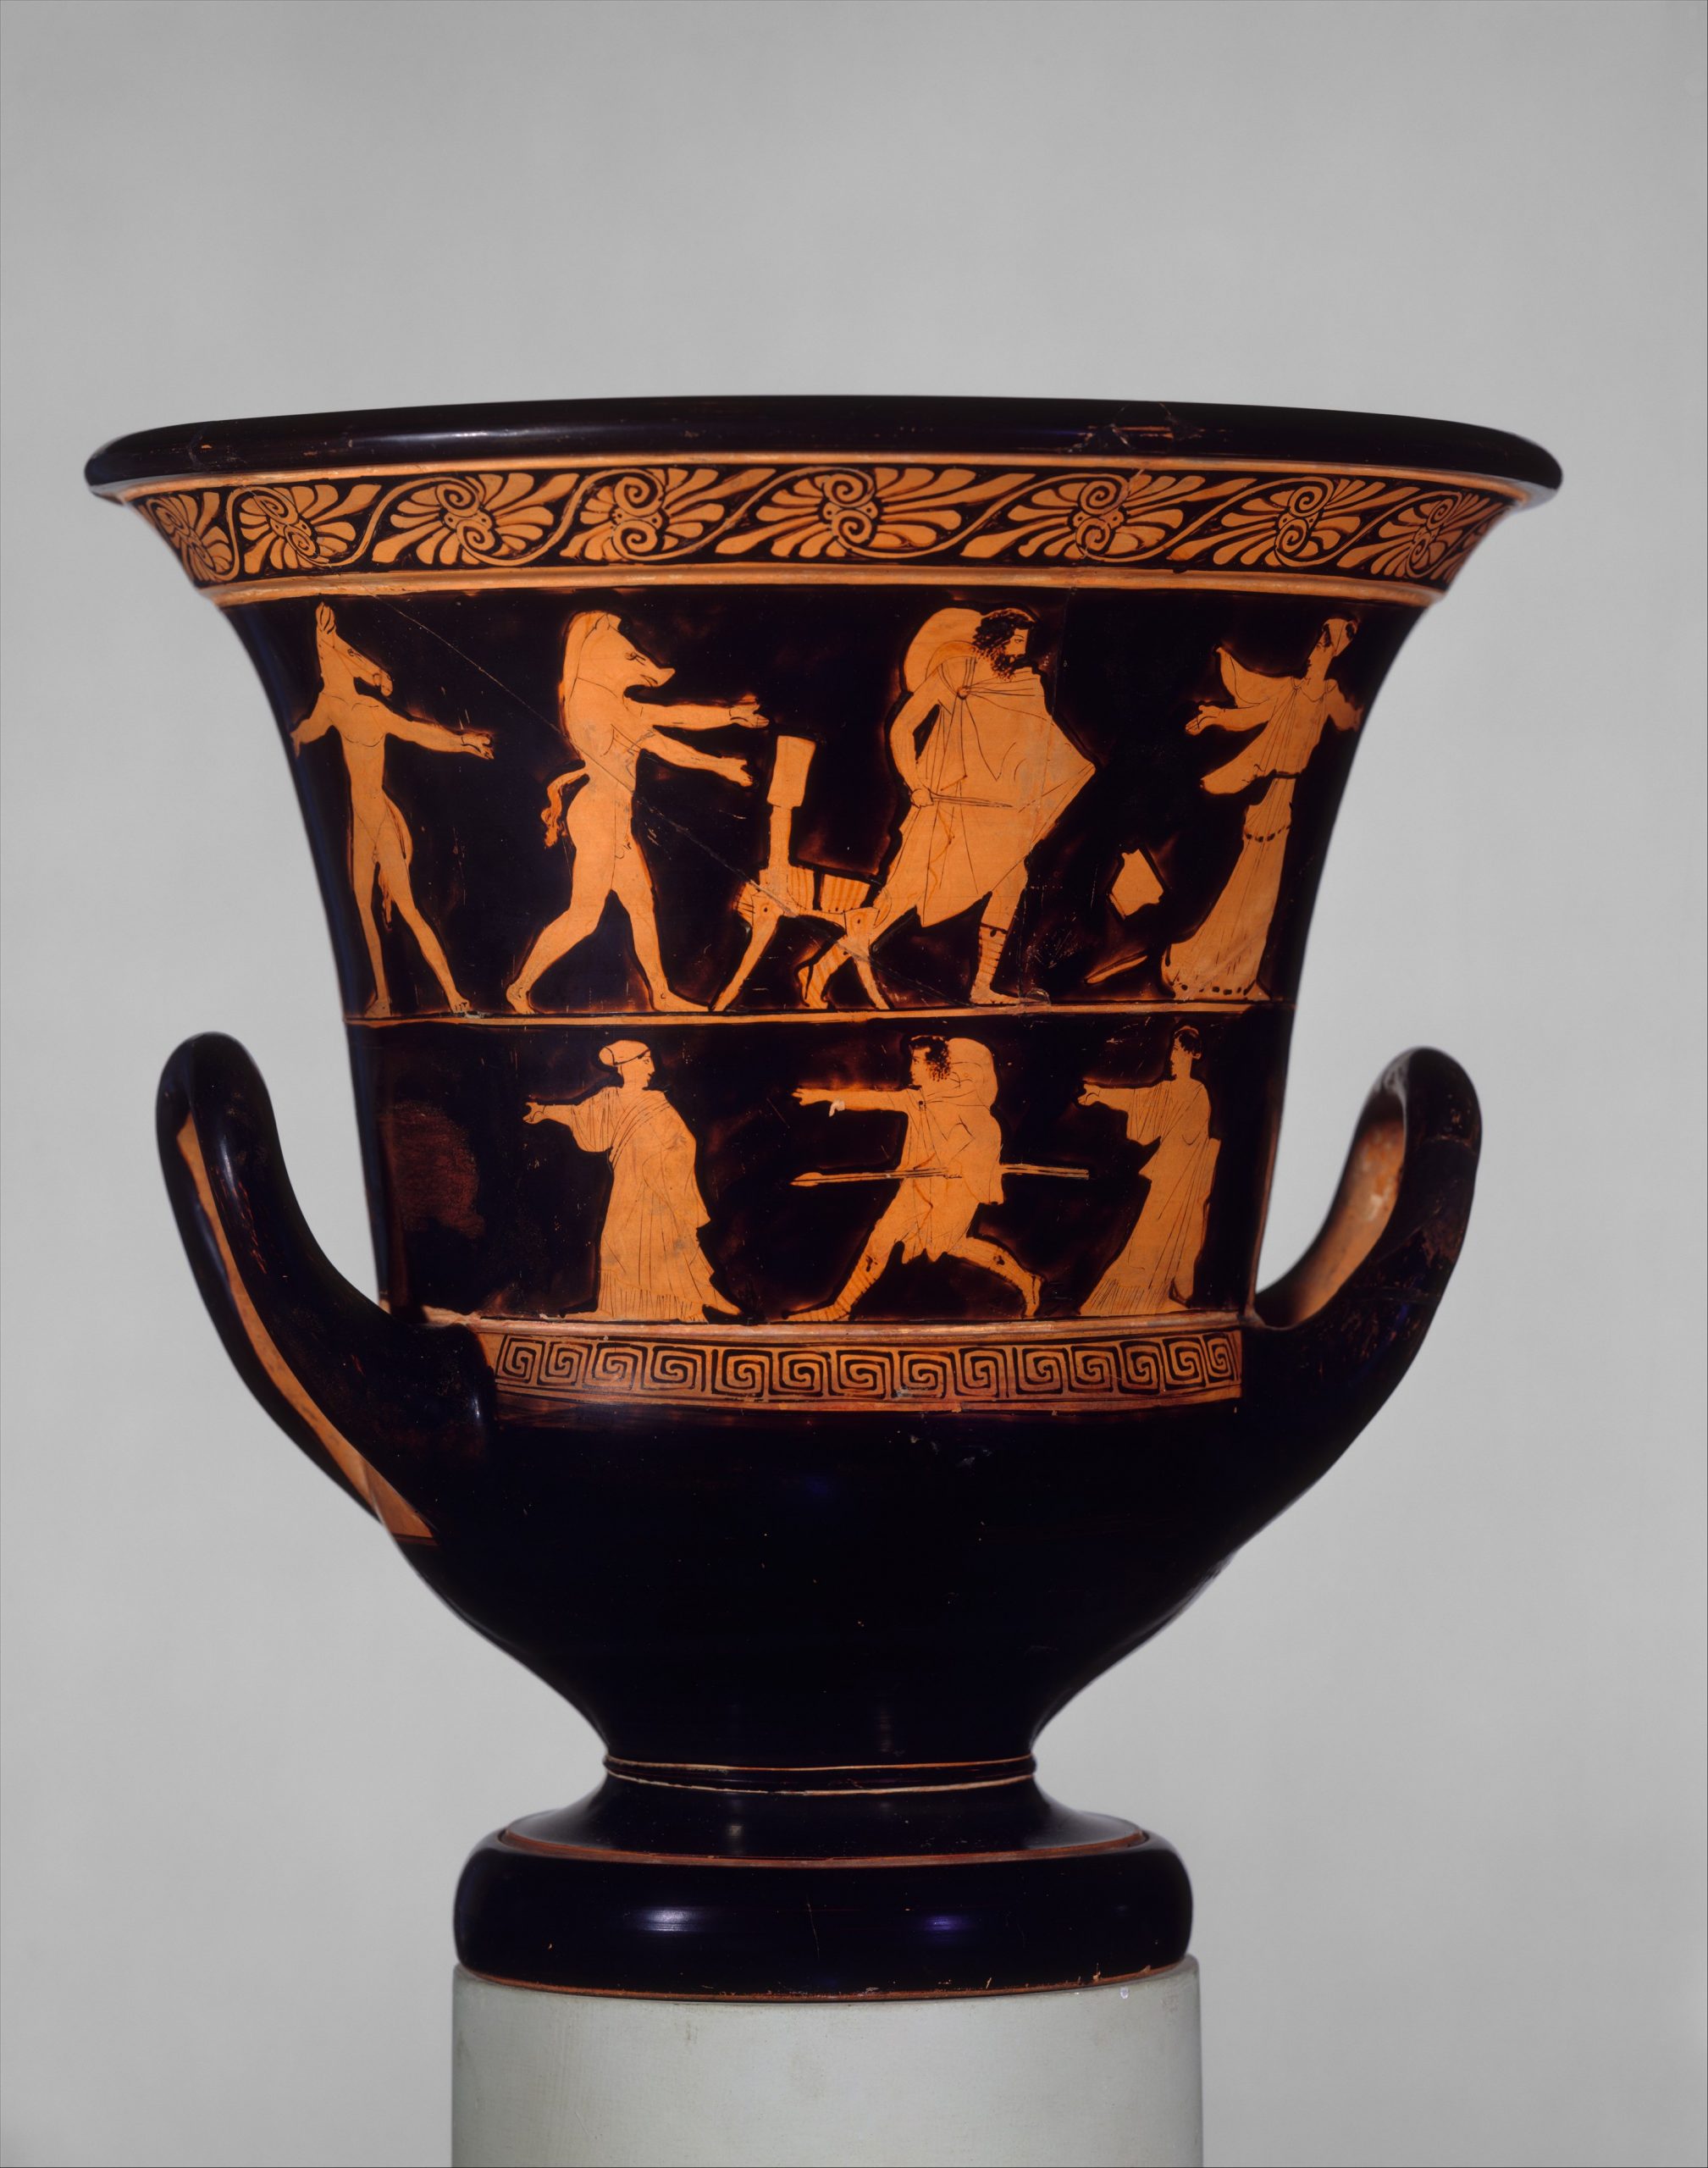 Odysseus, in a chlamys cape with a petasos hat around his neck, chases Circe with a knife. Circe, in billowing robes and a head wrap, flees. Behind Odysseus are two nude men with the heads and tales of boars. The bottom row of the krater shows a young man and two women running.